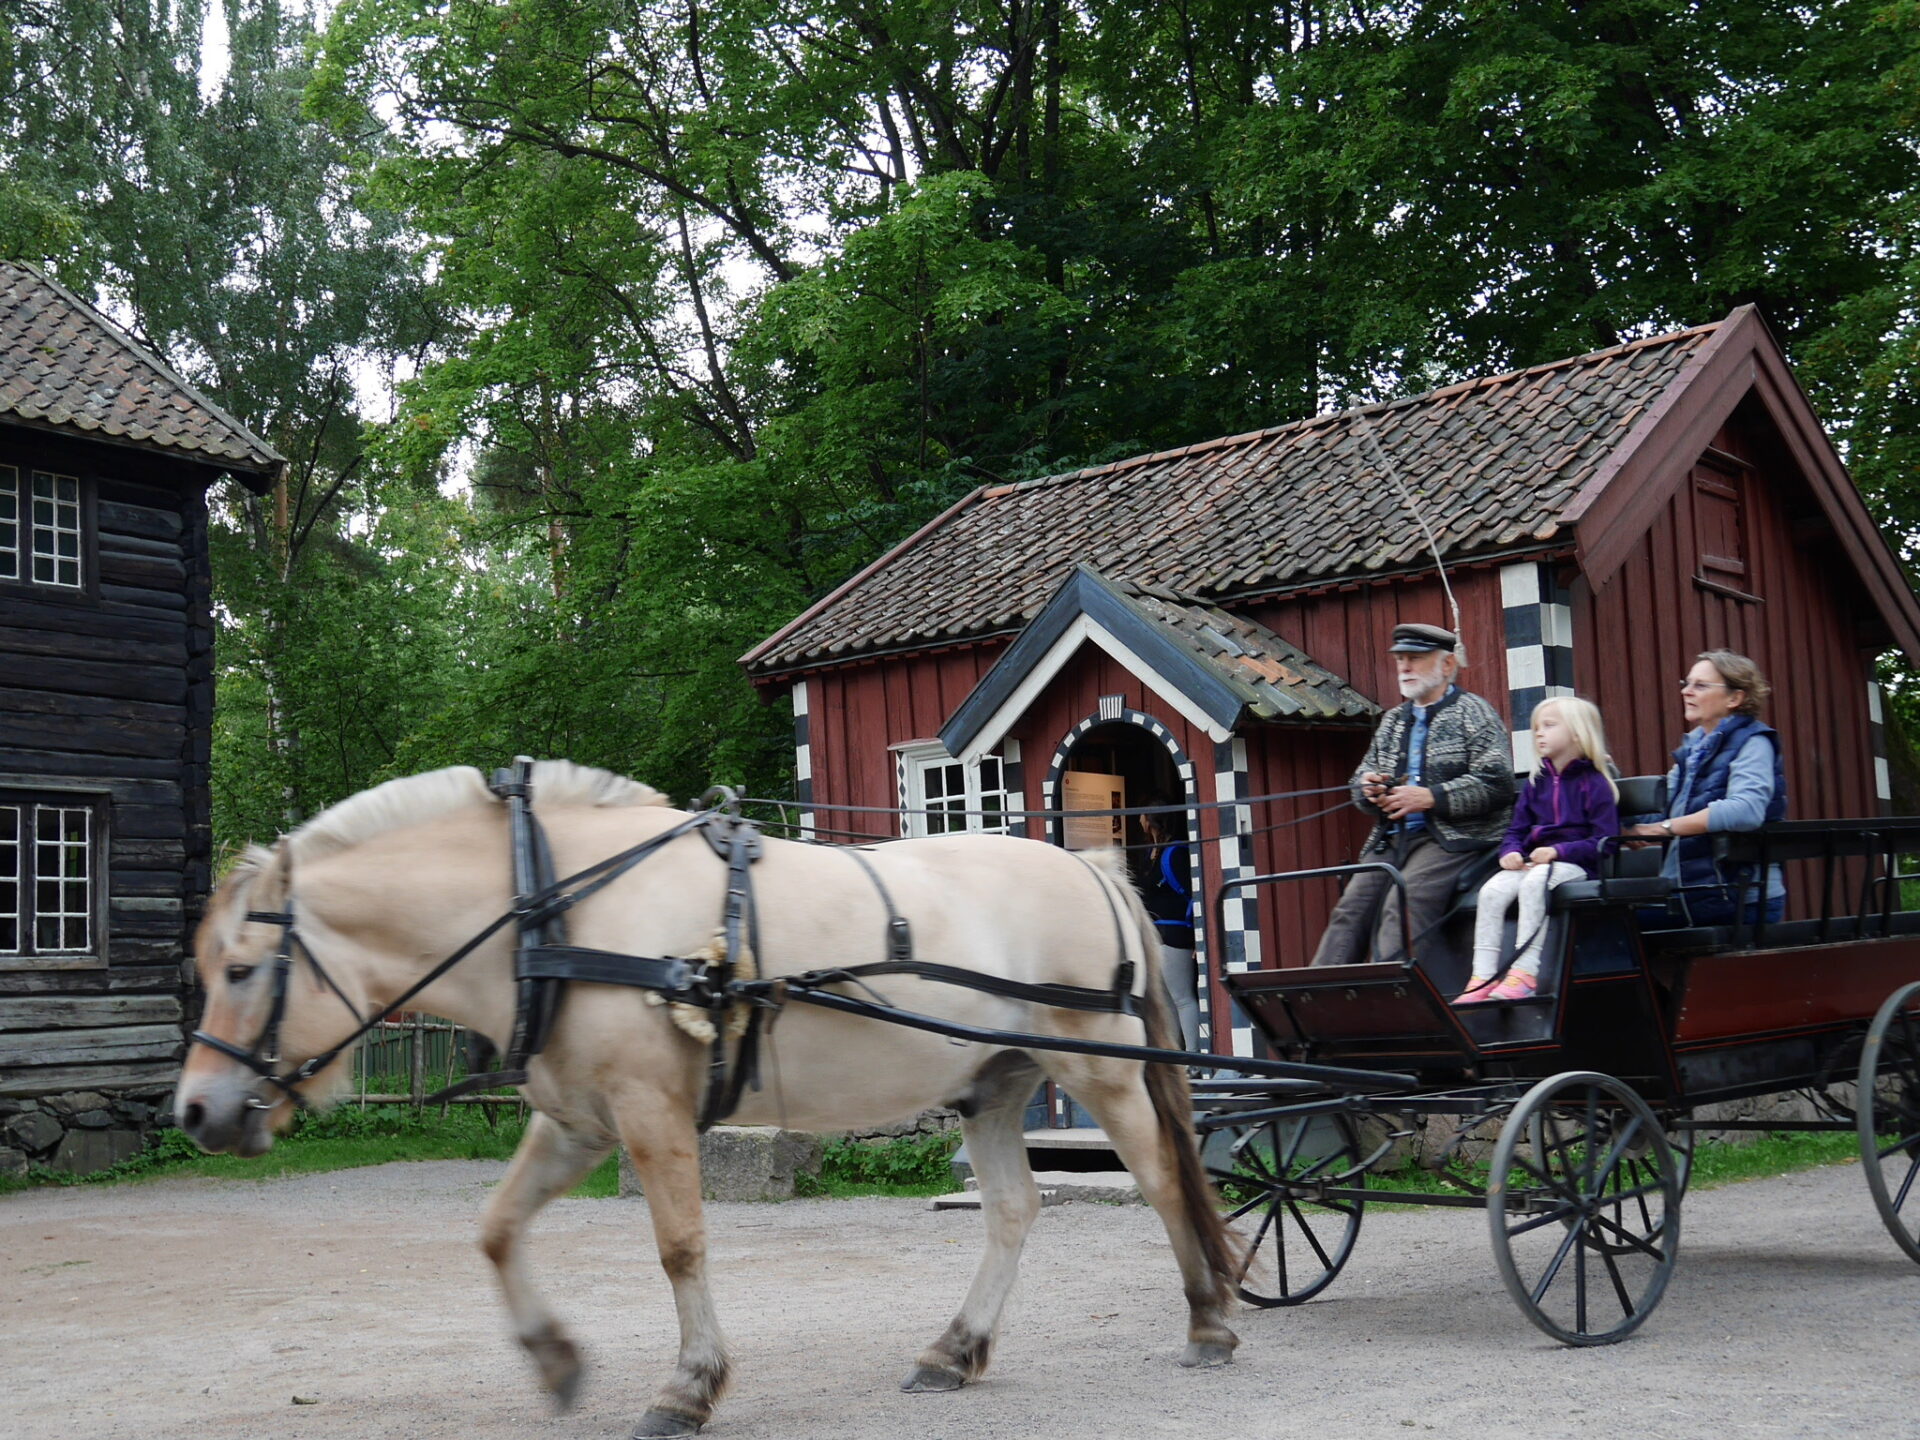 Horse drawn carriage service around Norsk Folkemuseum (Photo: Anya C.)